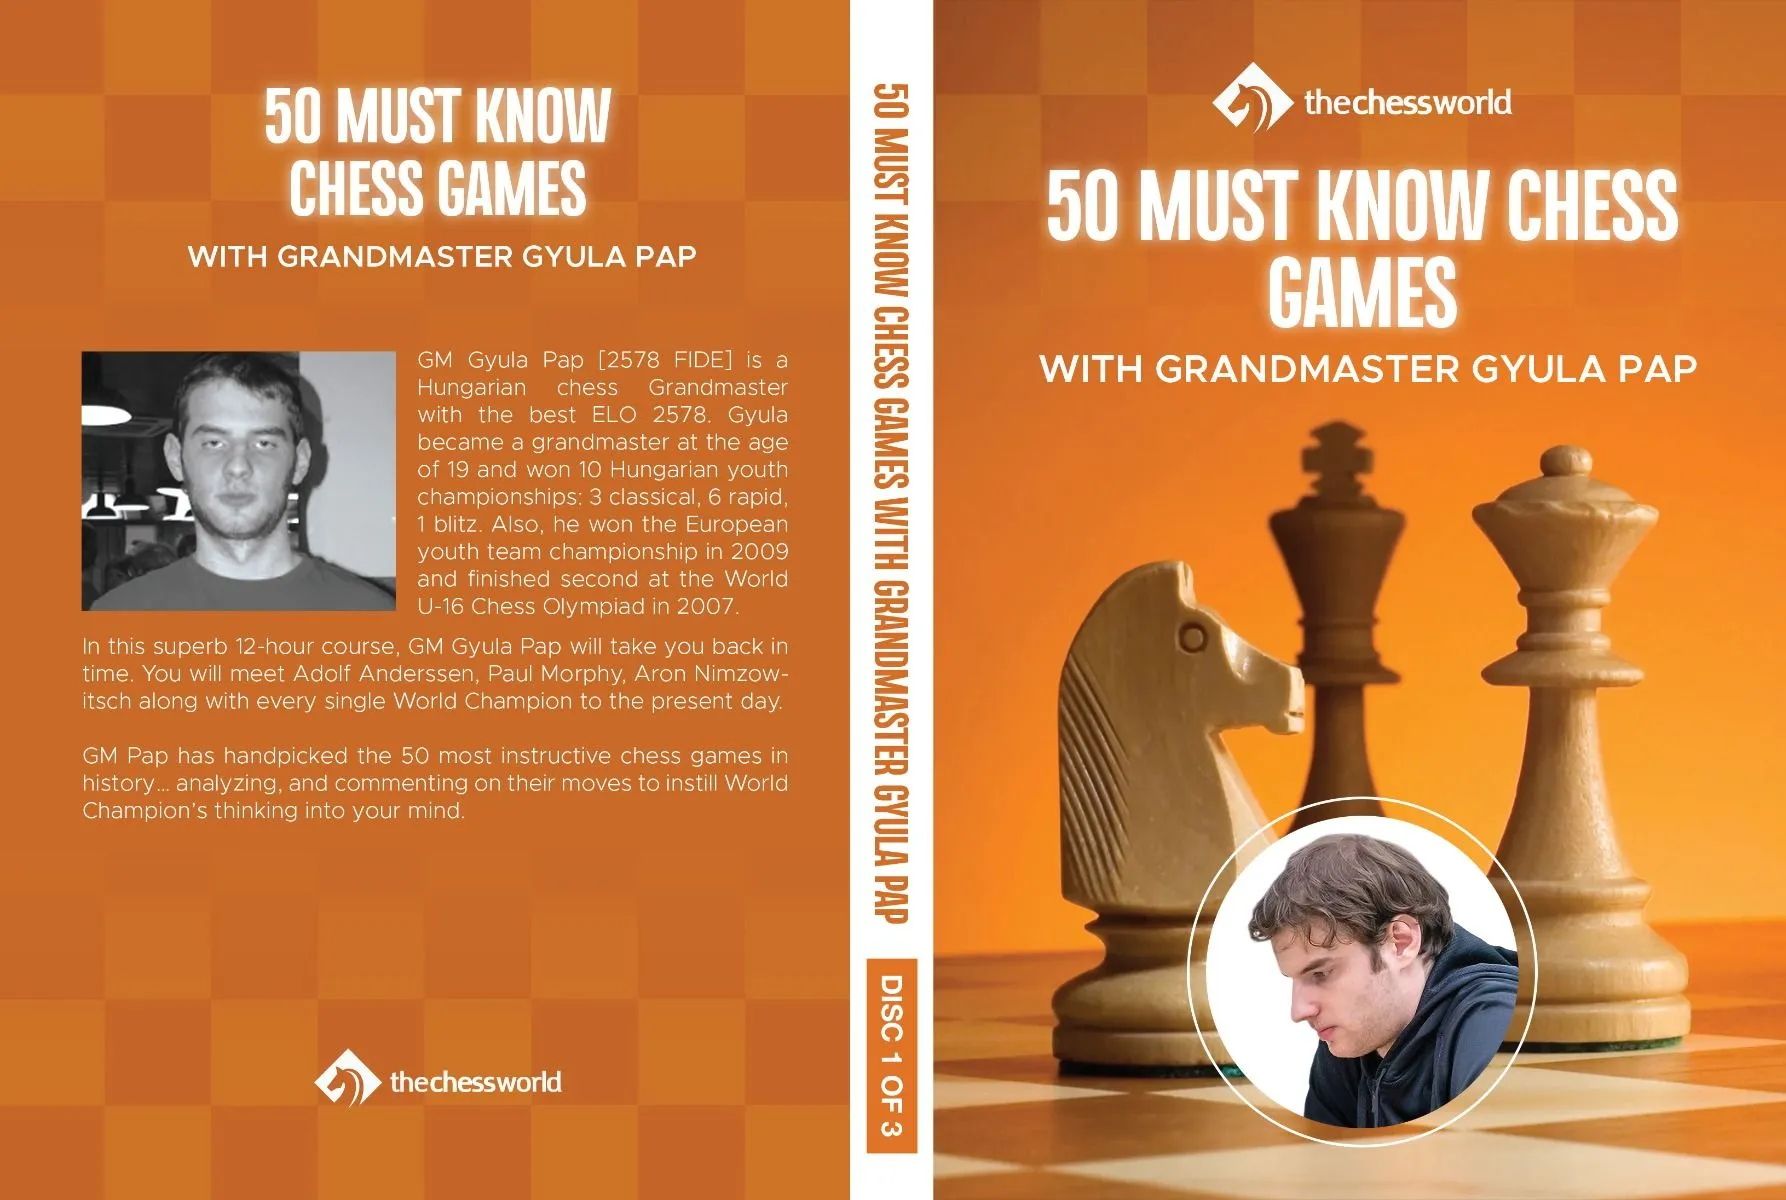 The best chess games of Paul Morphy 